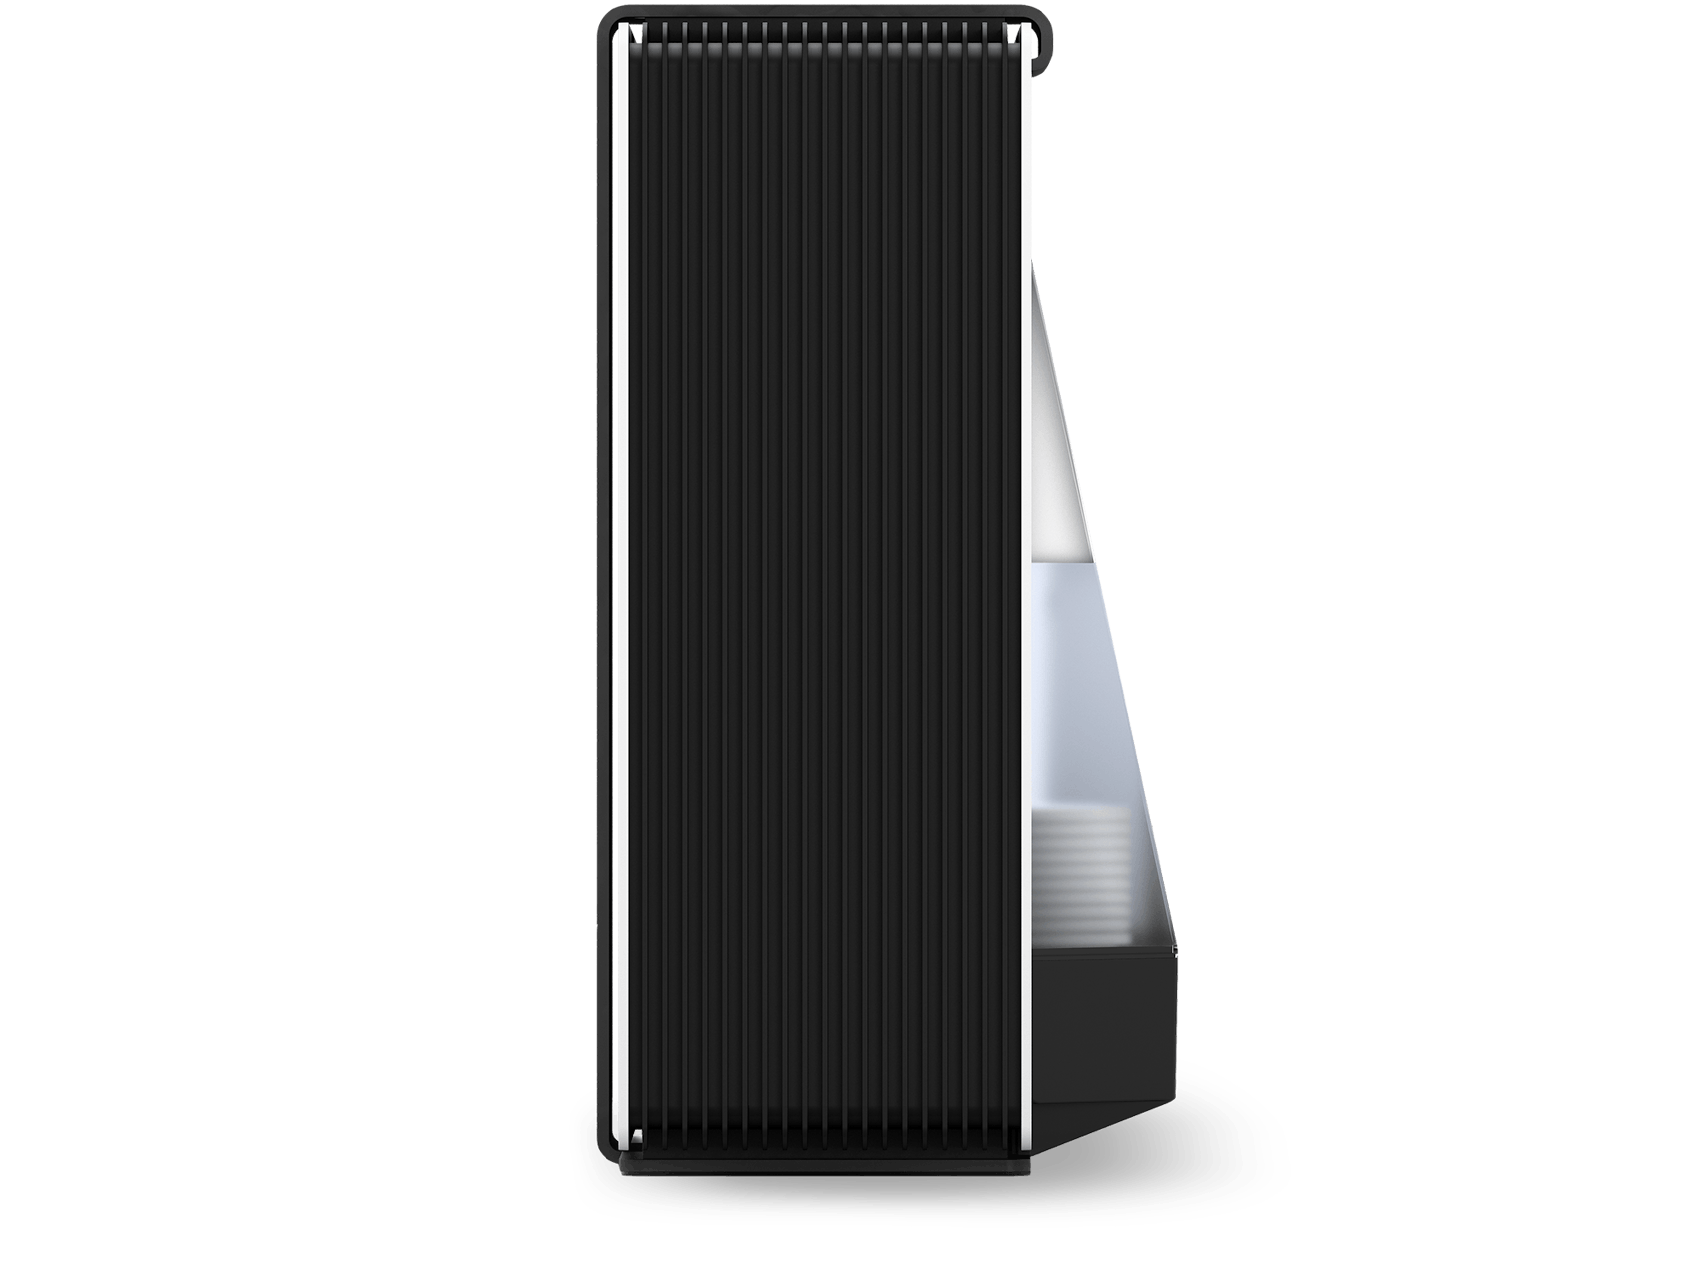 Robert air washer by Stadler Form in black as side view